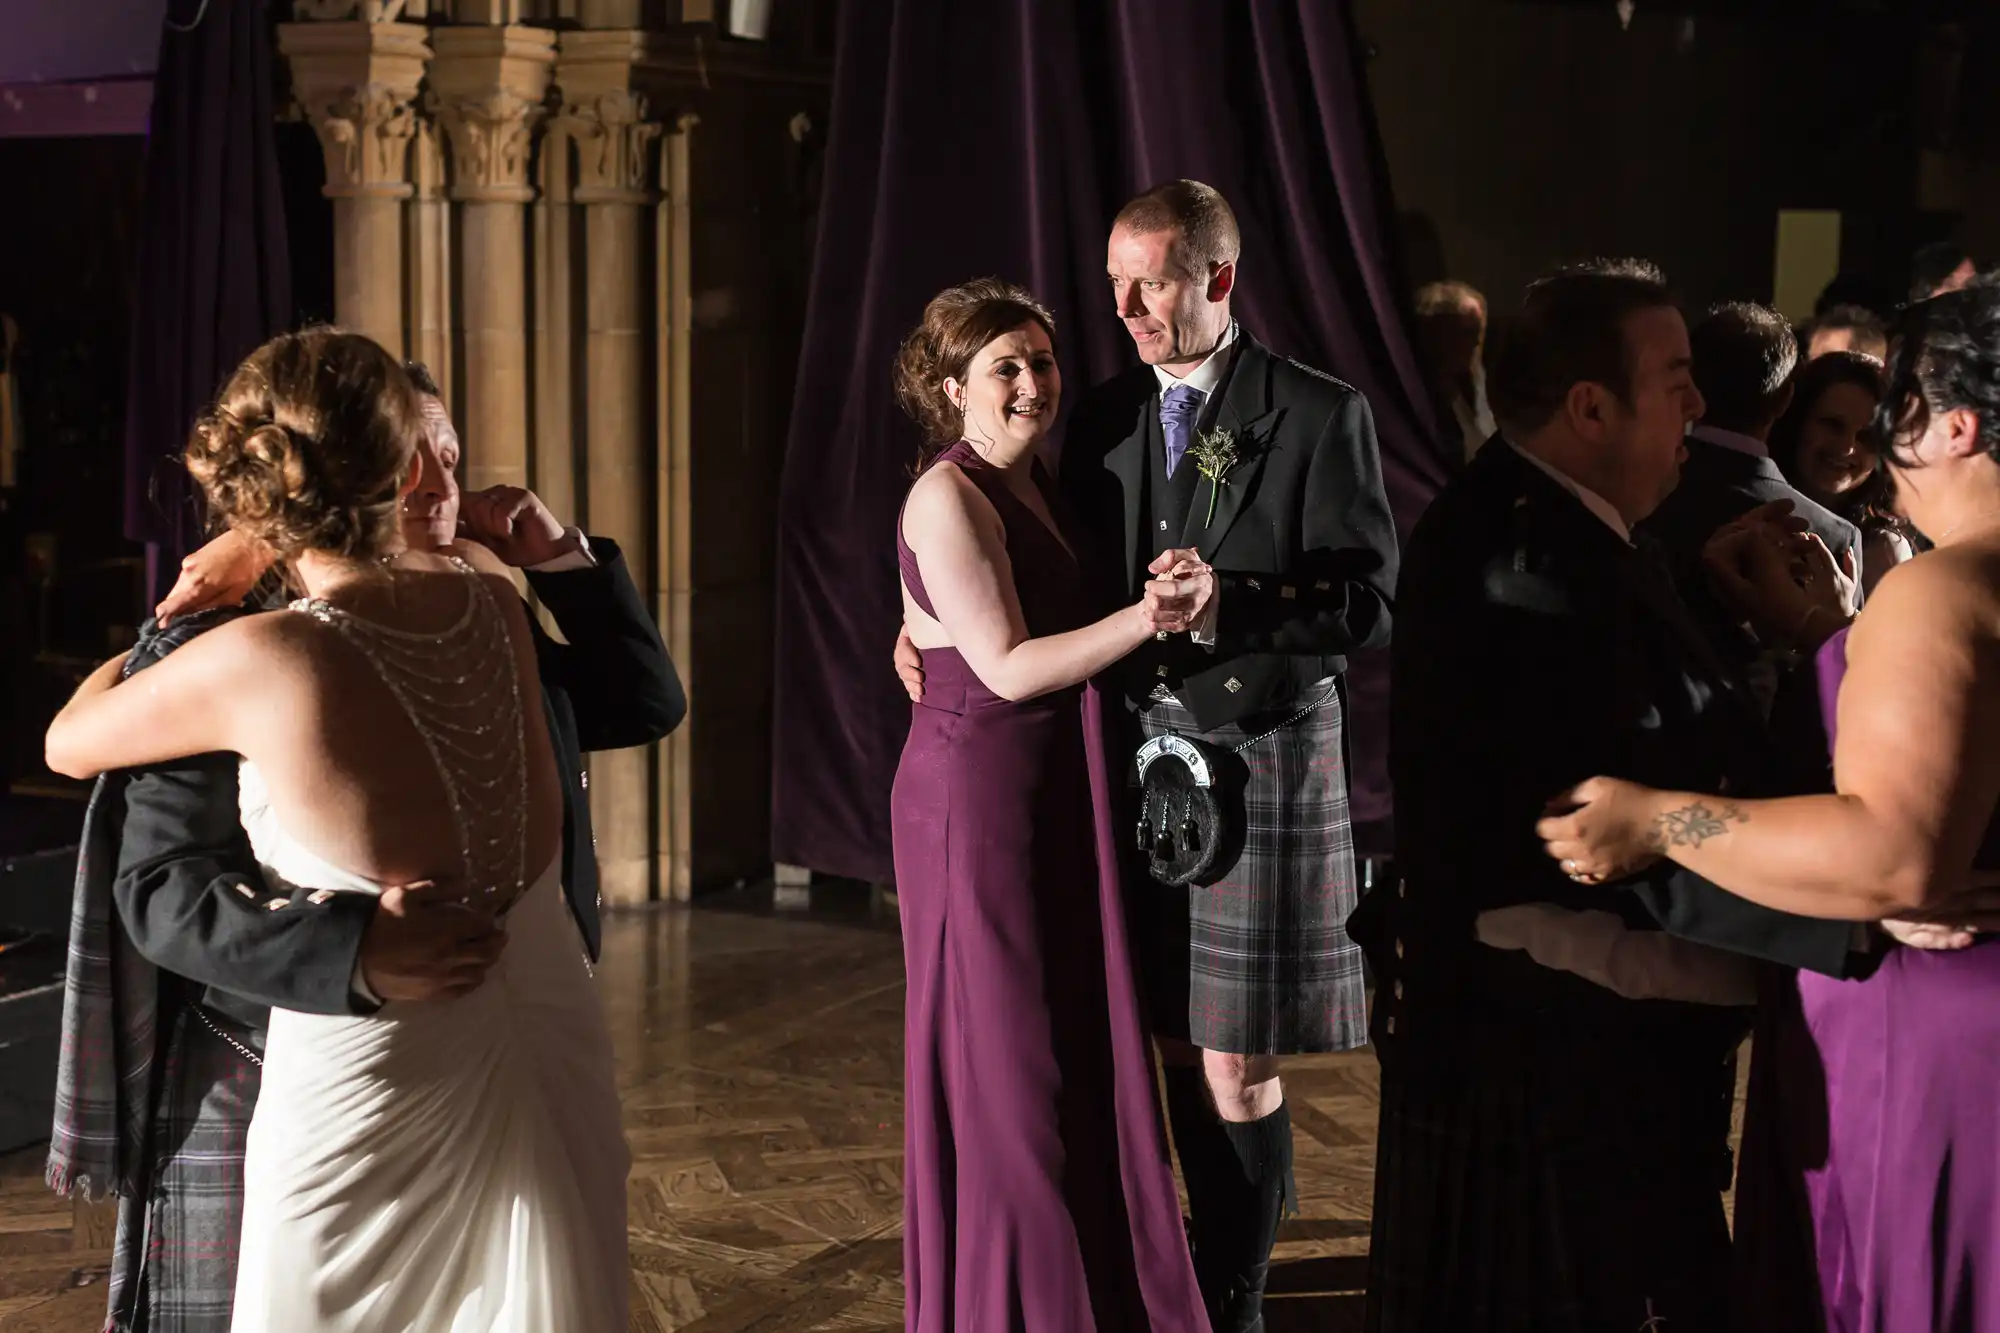 Couples dancing at a formal event, with one man in a kilt and women in elegant dresses.